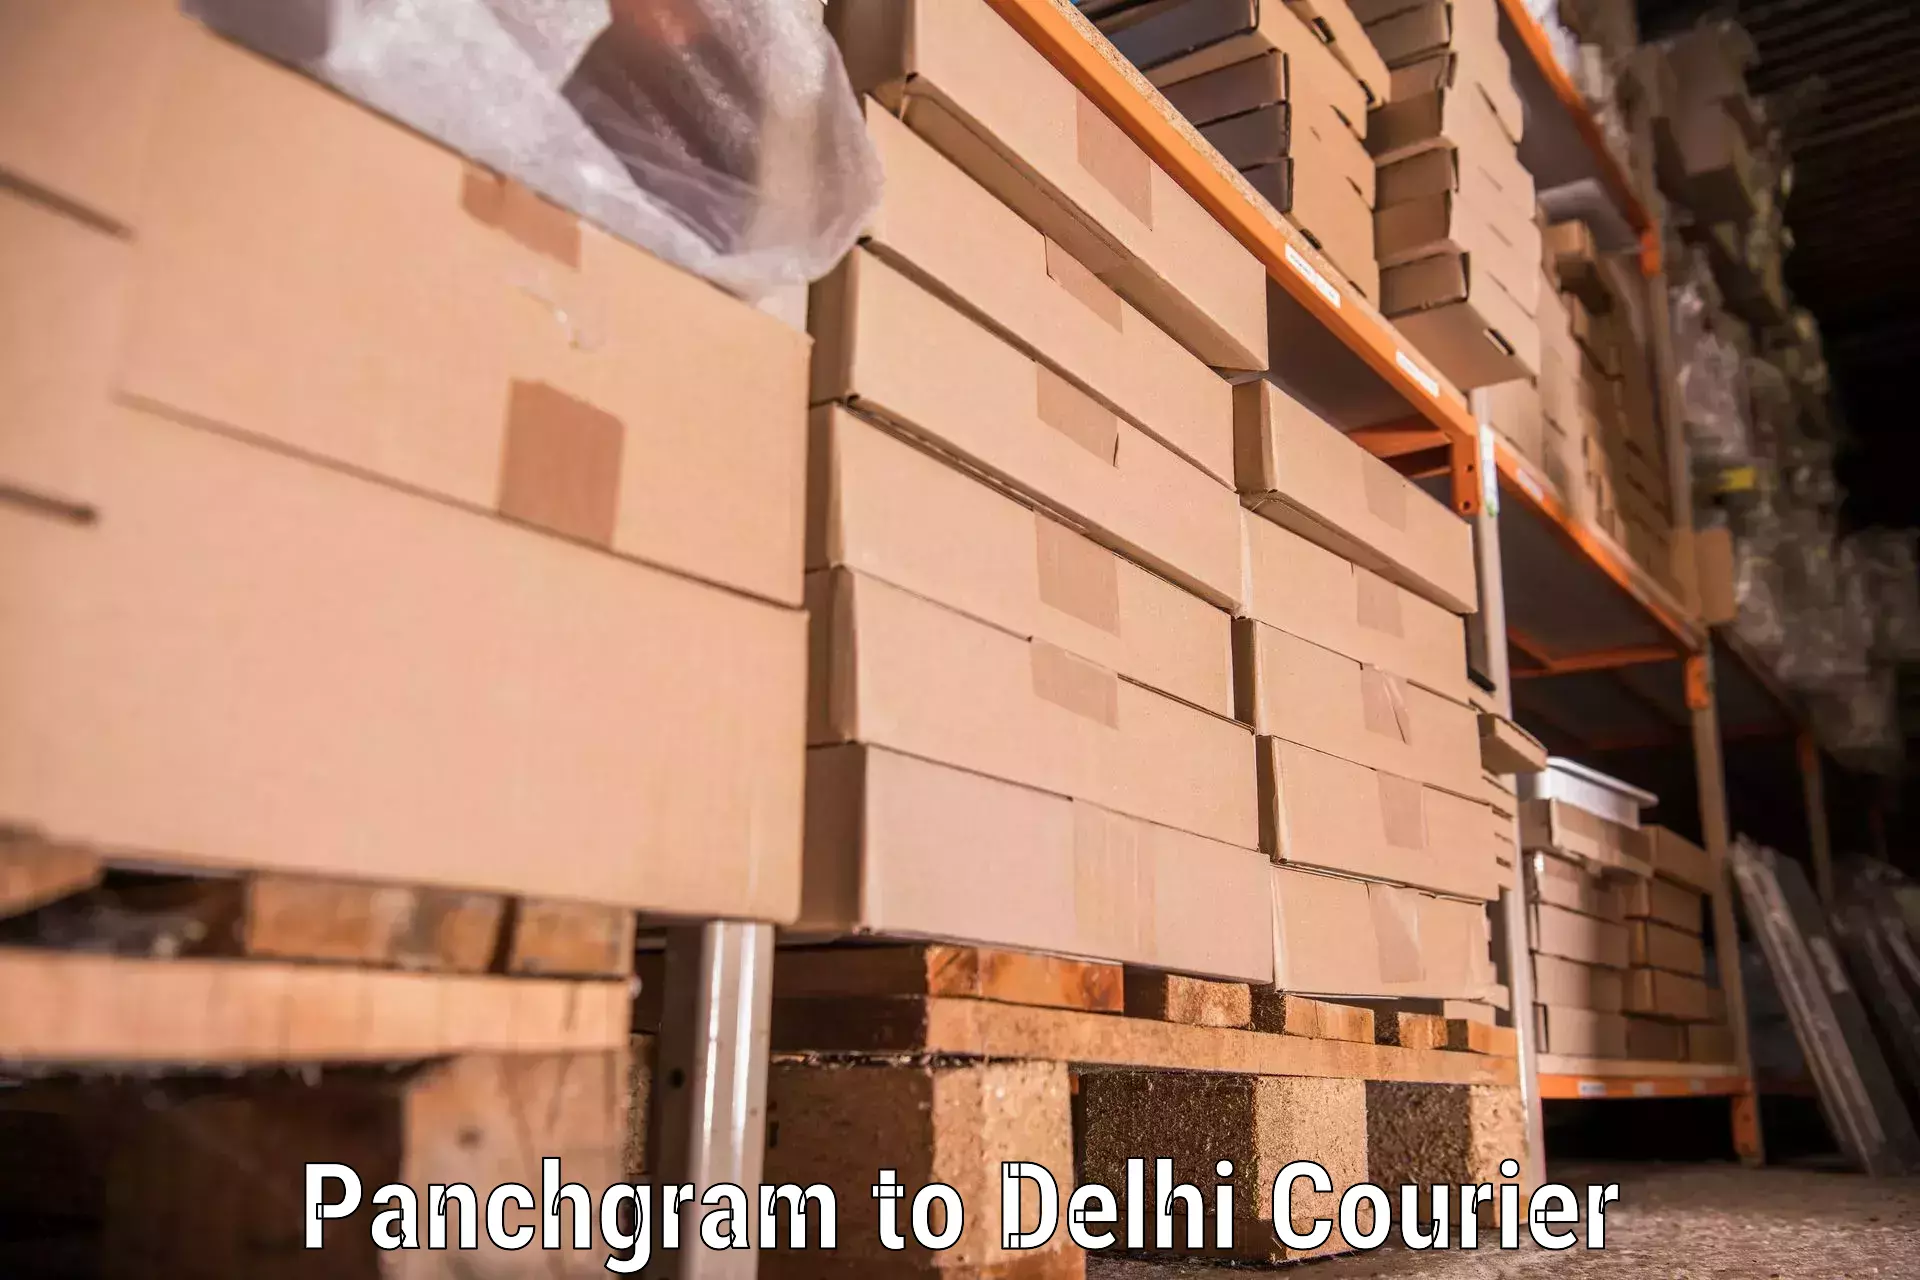 Quality moving and storage Panchgram to NCR